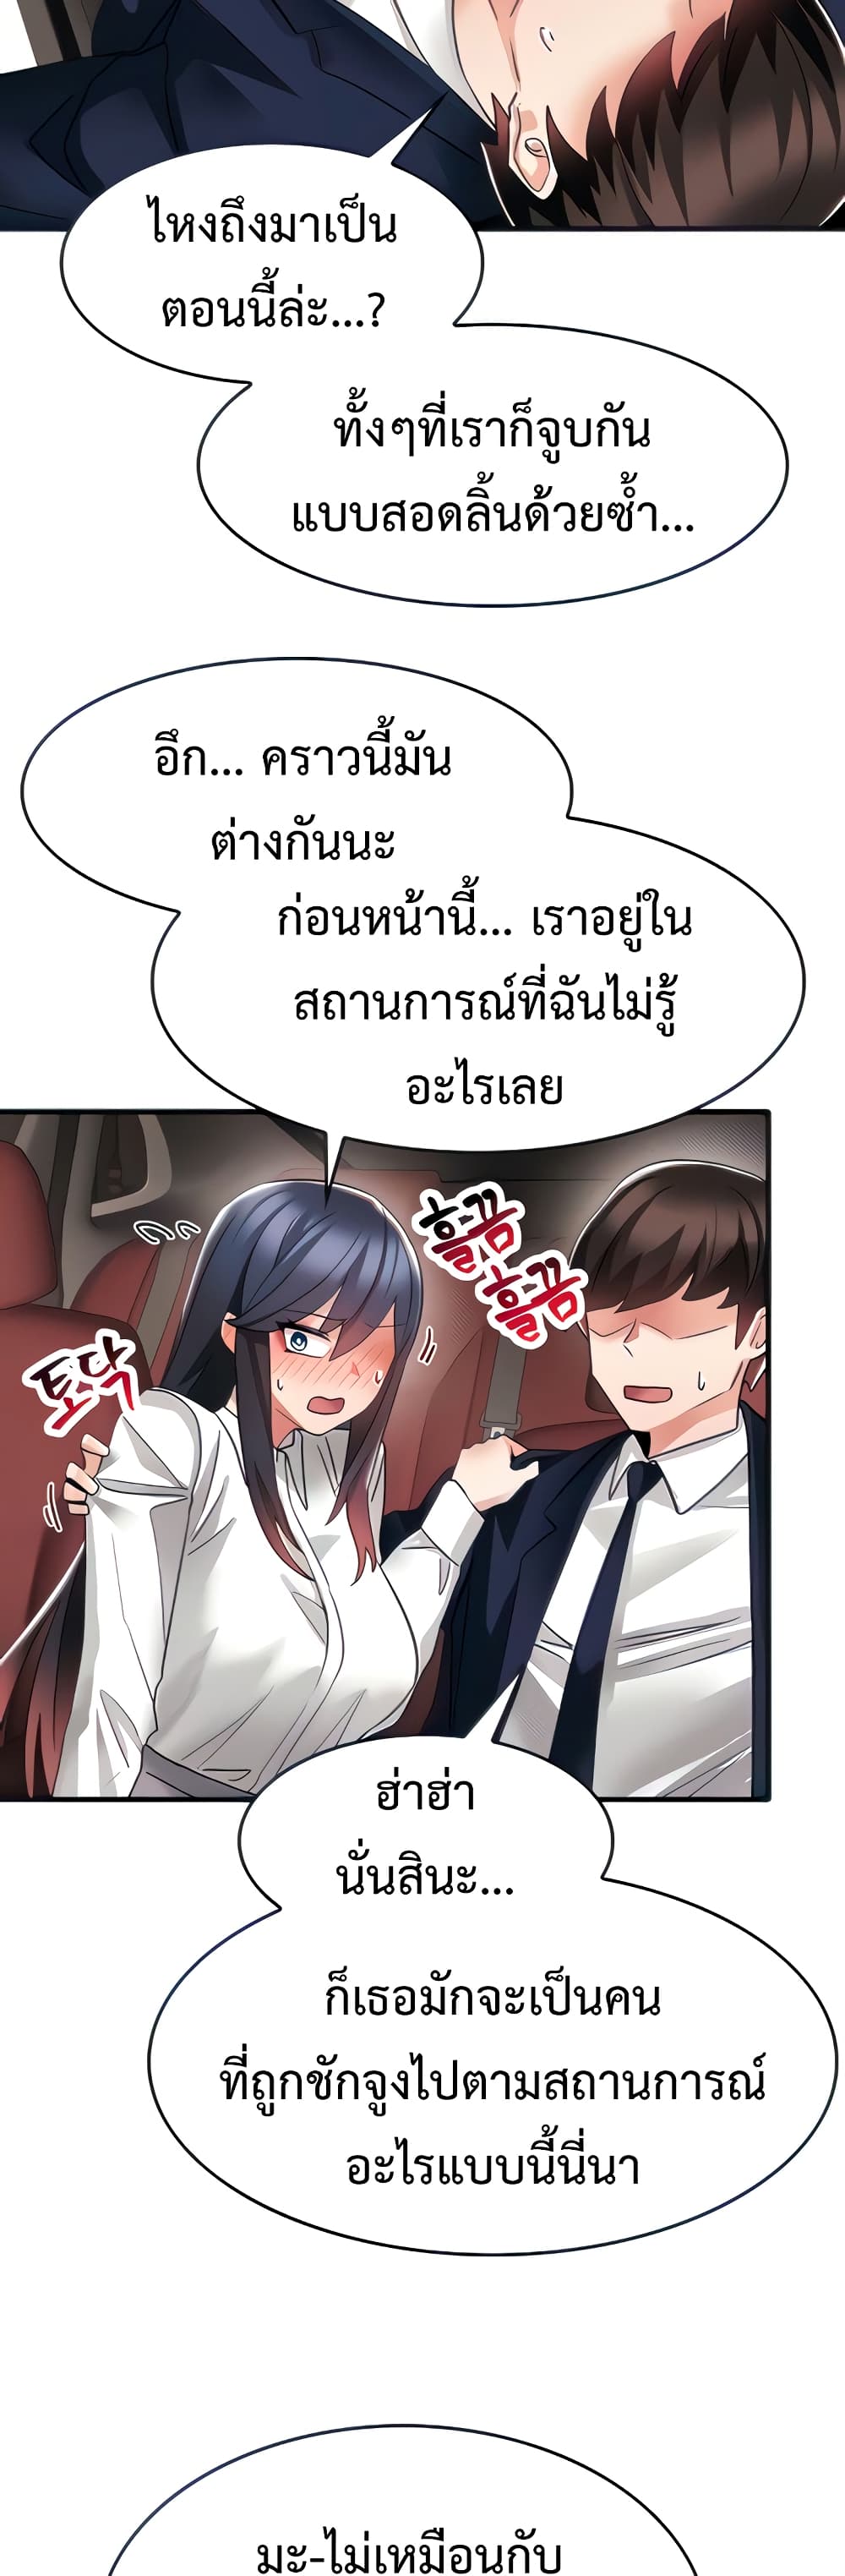 Relationship Reverse Button: Let’s Make Her Submissive 8 ภาพที่ 5